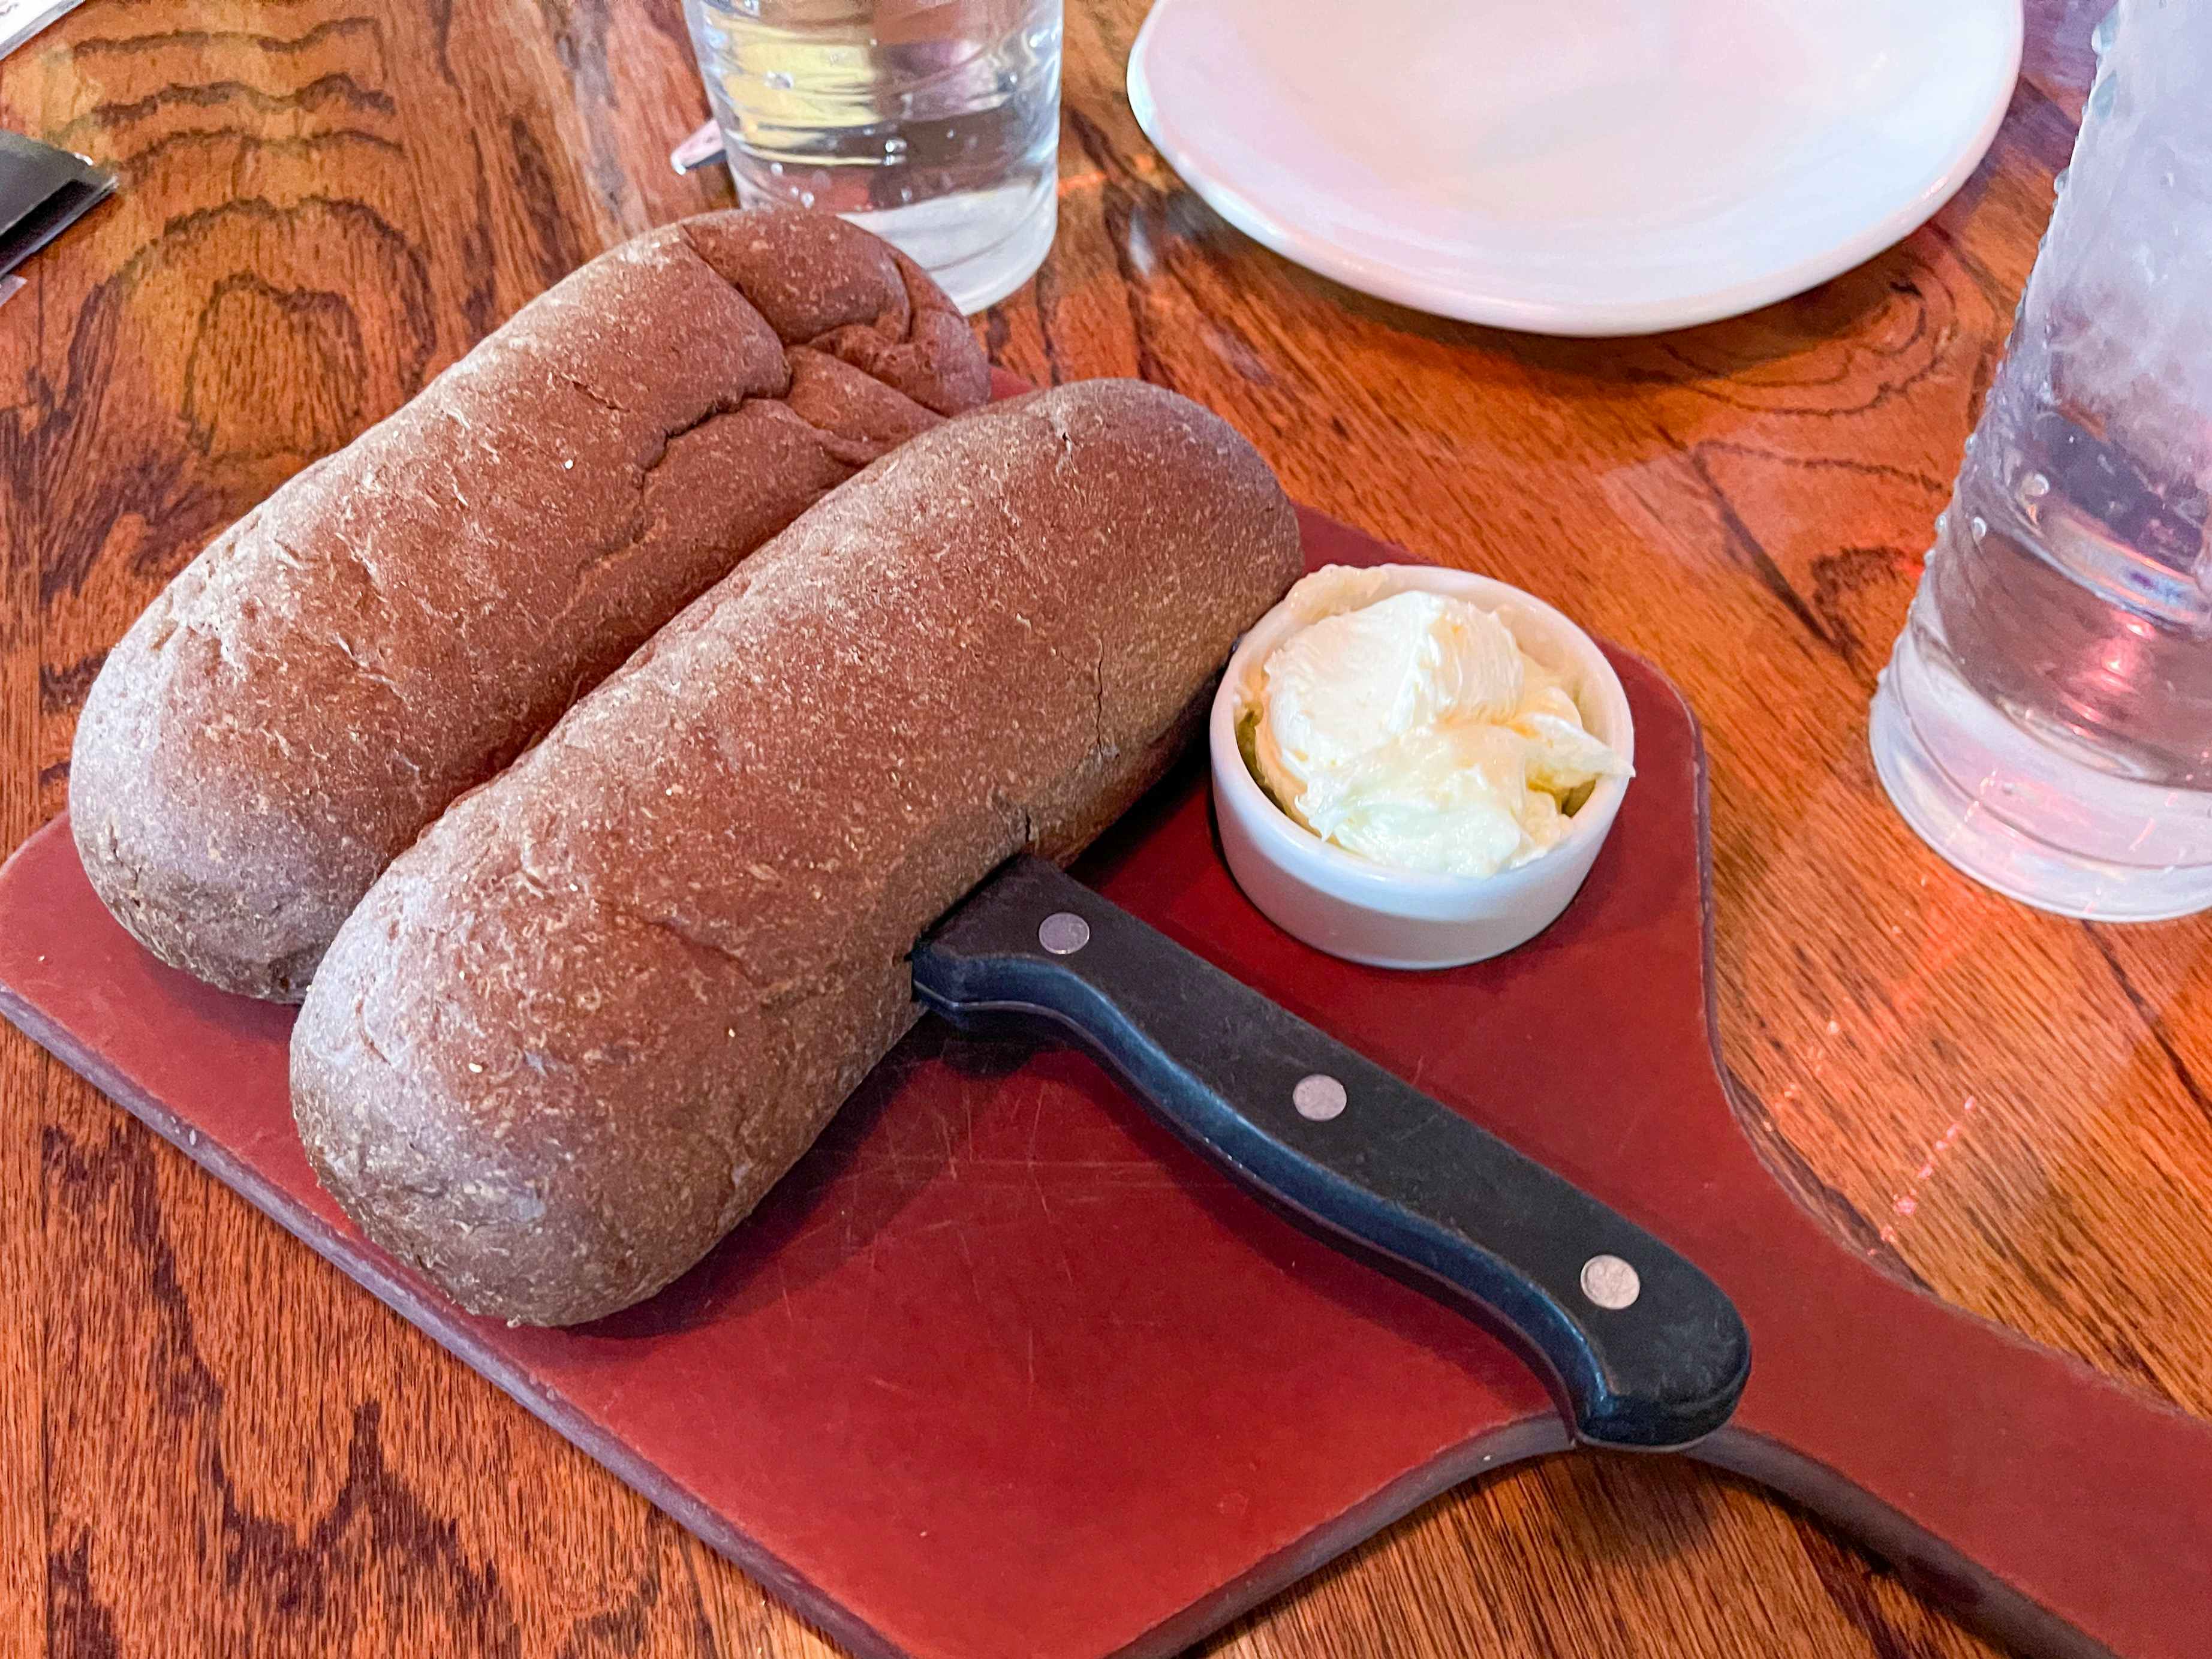 Some bread served on a platter with a knife and a cup of butter at Outback Steakhouse.